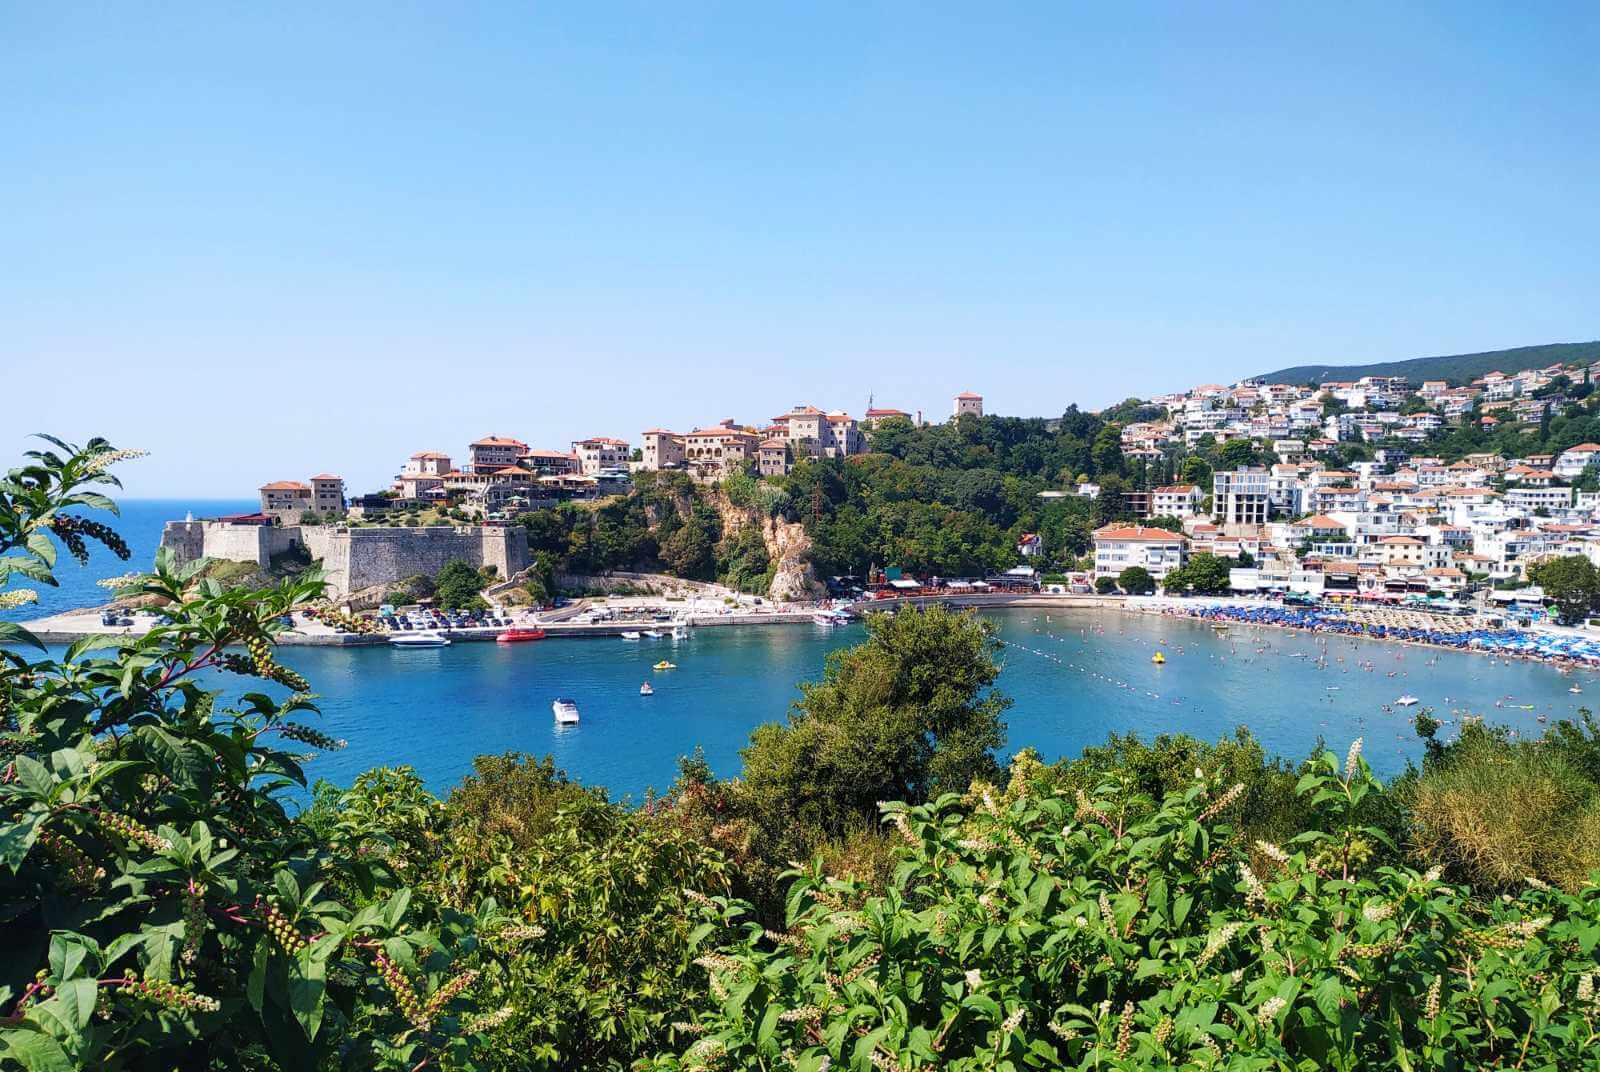 Ulcinj with its surroundings - one of the most beautiful destinations on the Montenegrin coast